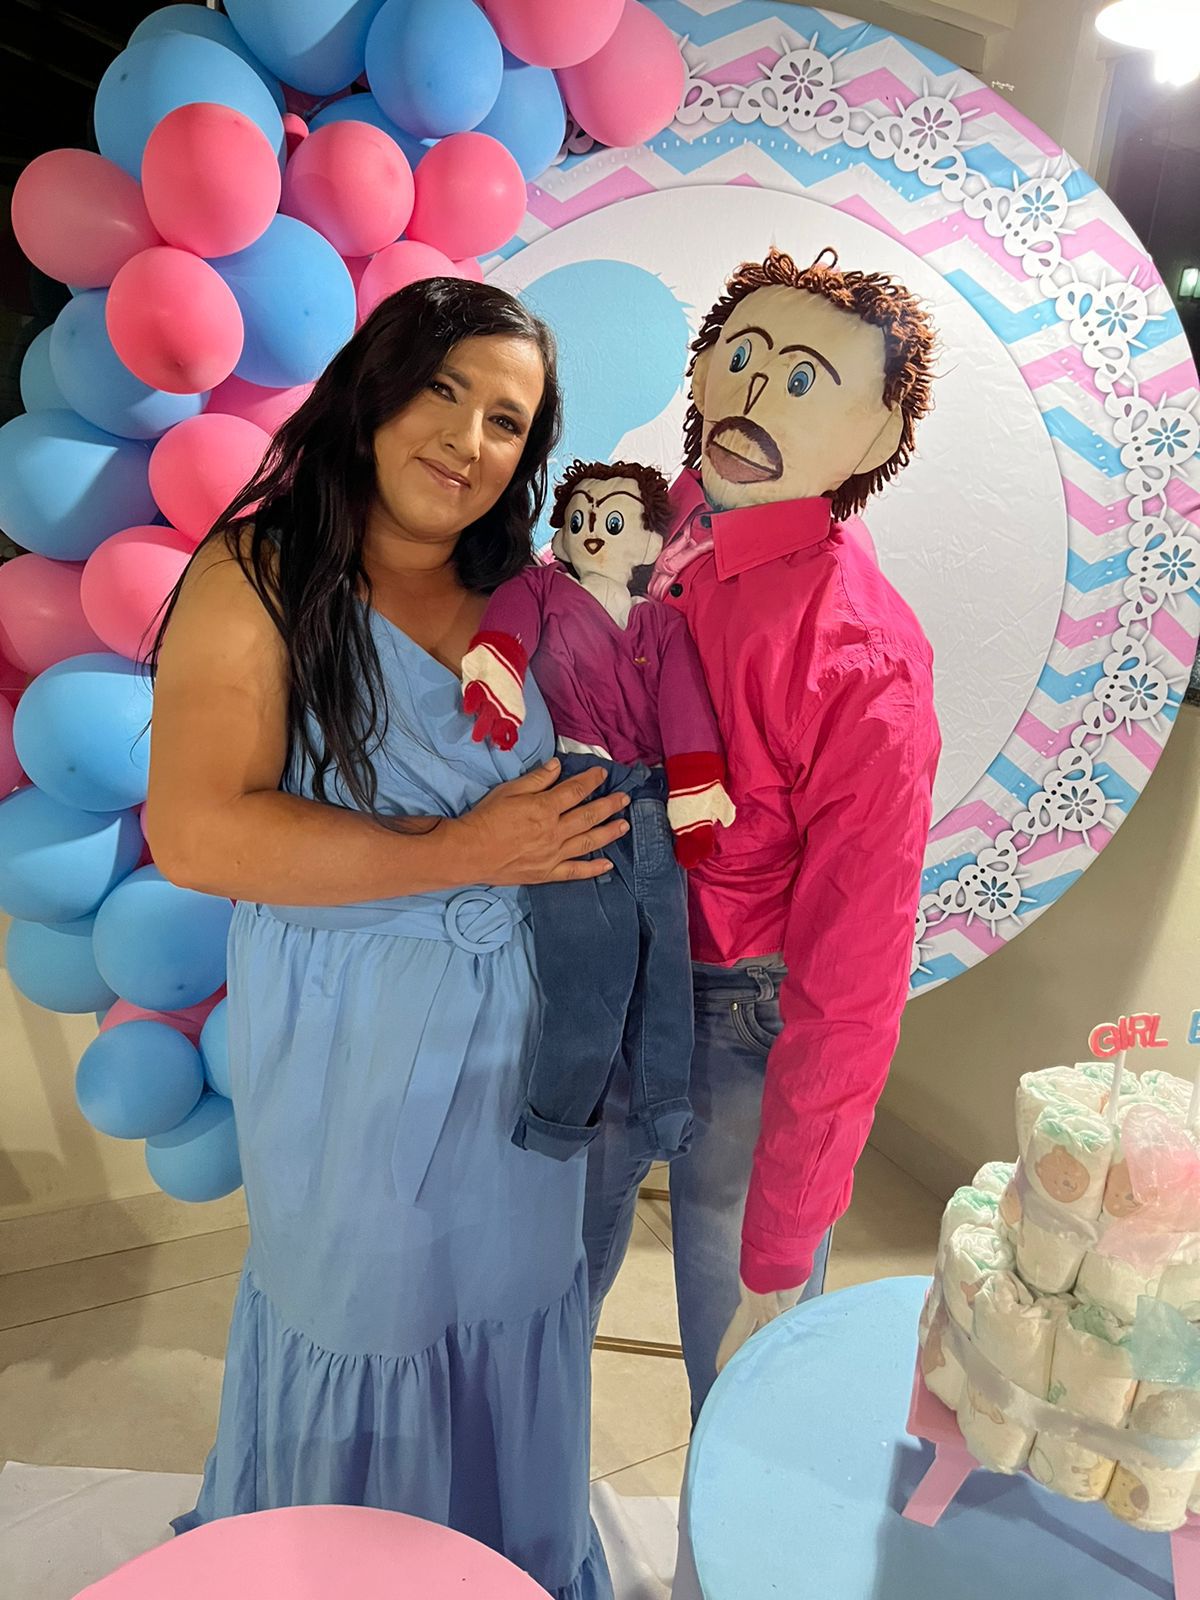 Meirivone, Marcelo and Marcelinho at the gender reveal of the second rag doll baby.